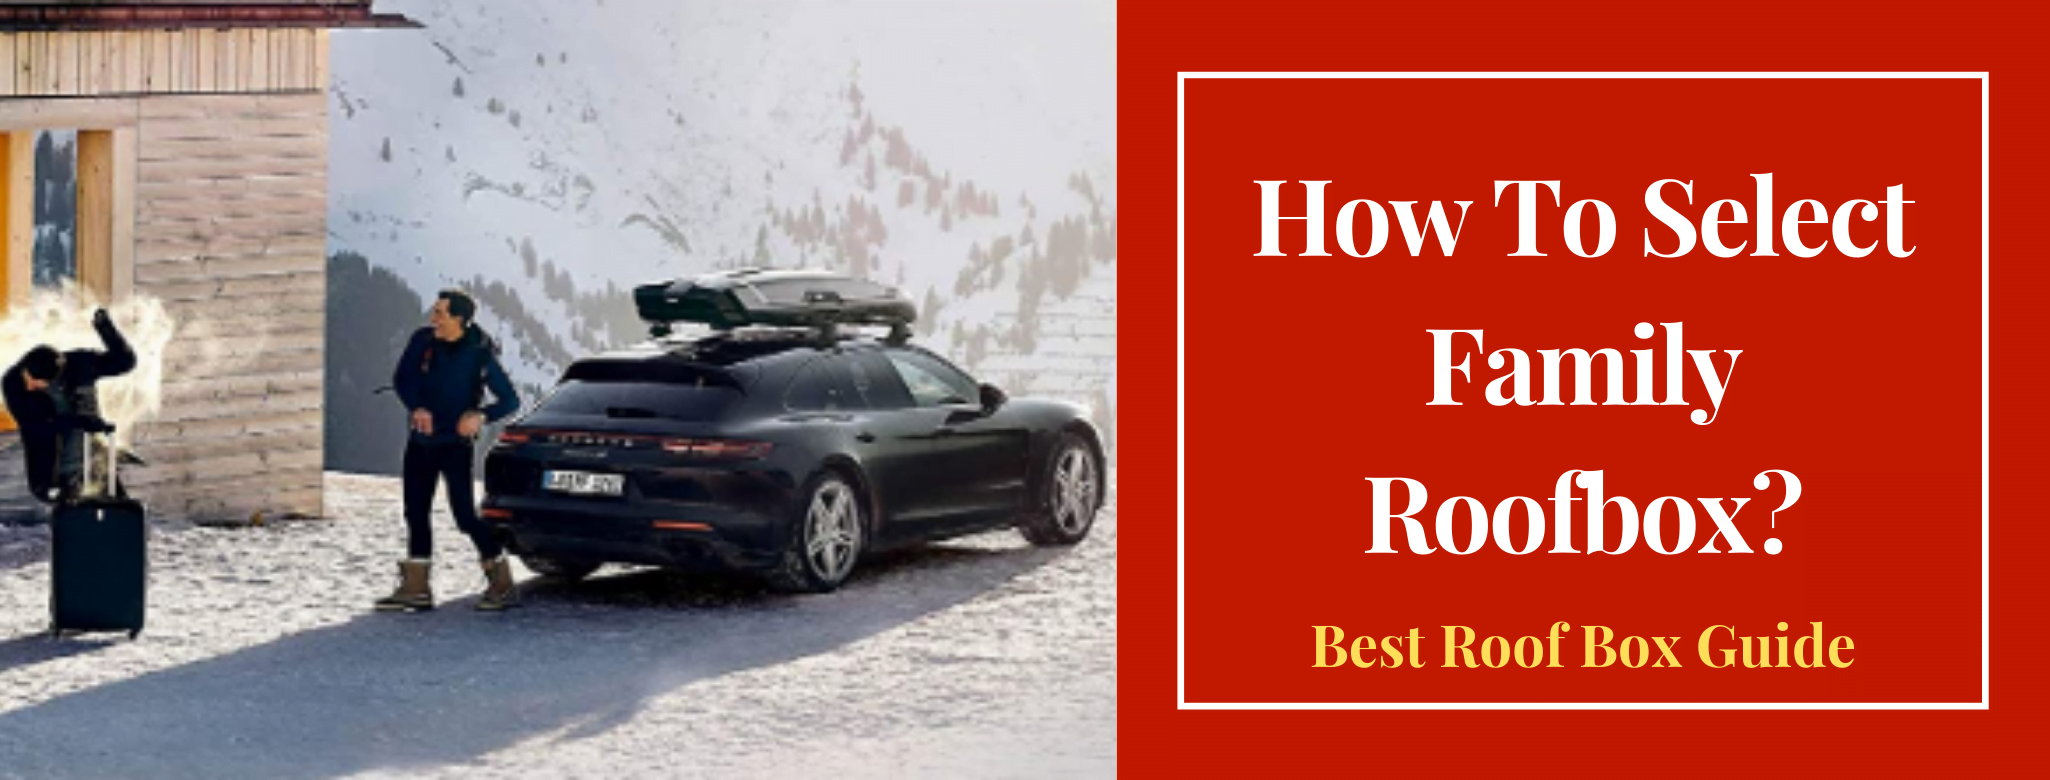 🏕️ Best Camping Cargo Box Reviews | Top Roof Boxes For Camping 🚘